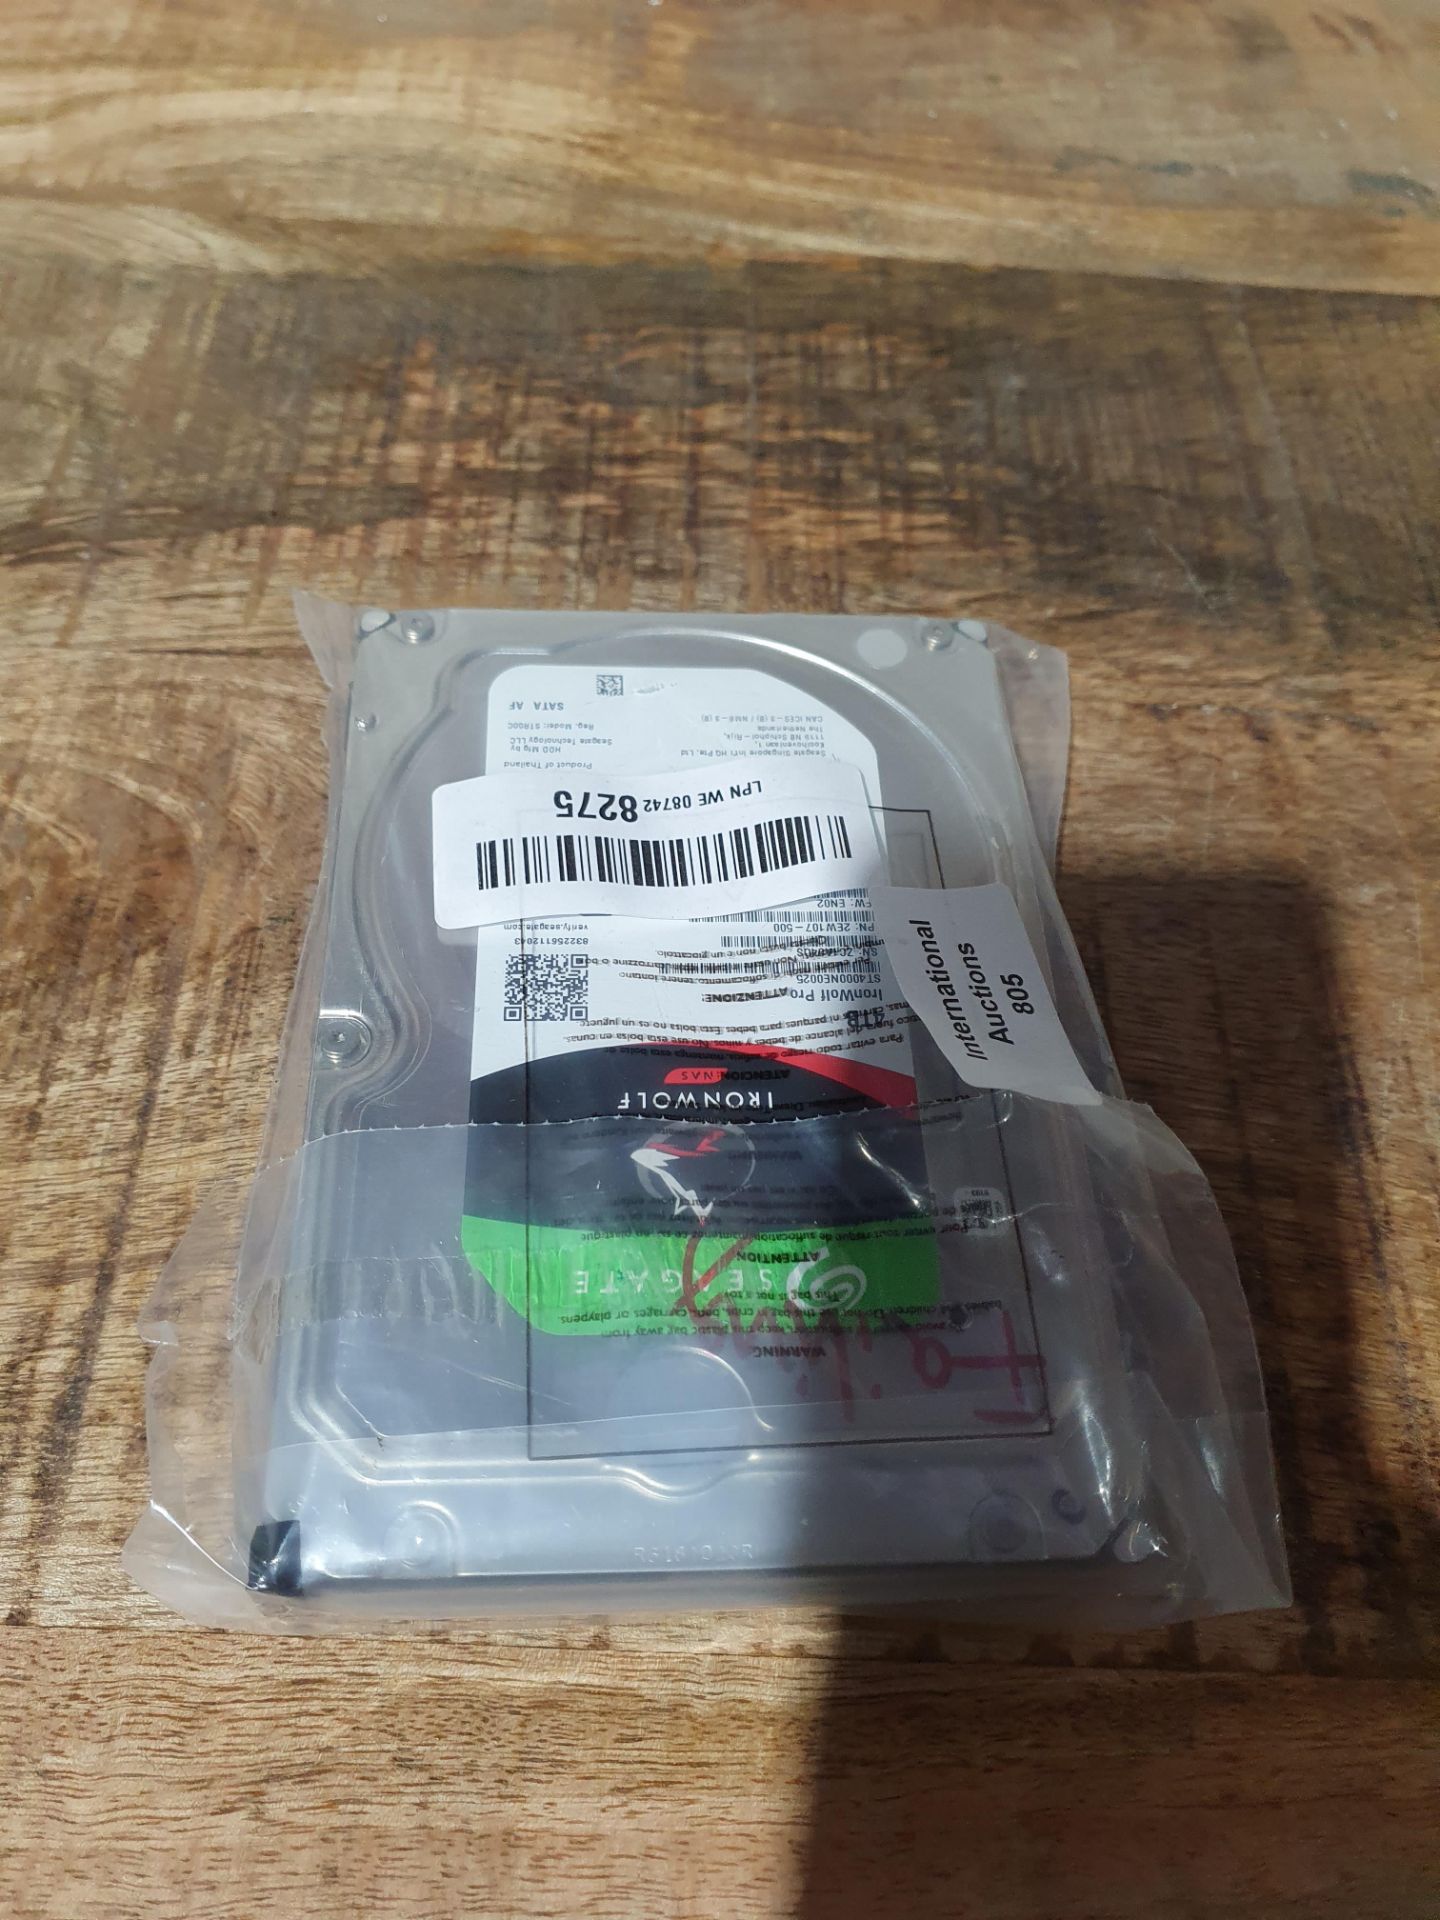 SEAGATE HARD DRIVECondition ReportAppraisal Available on Request - All Items are Unchecked/